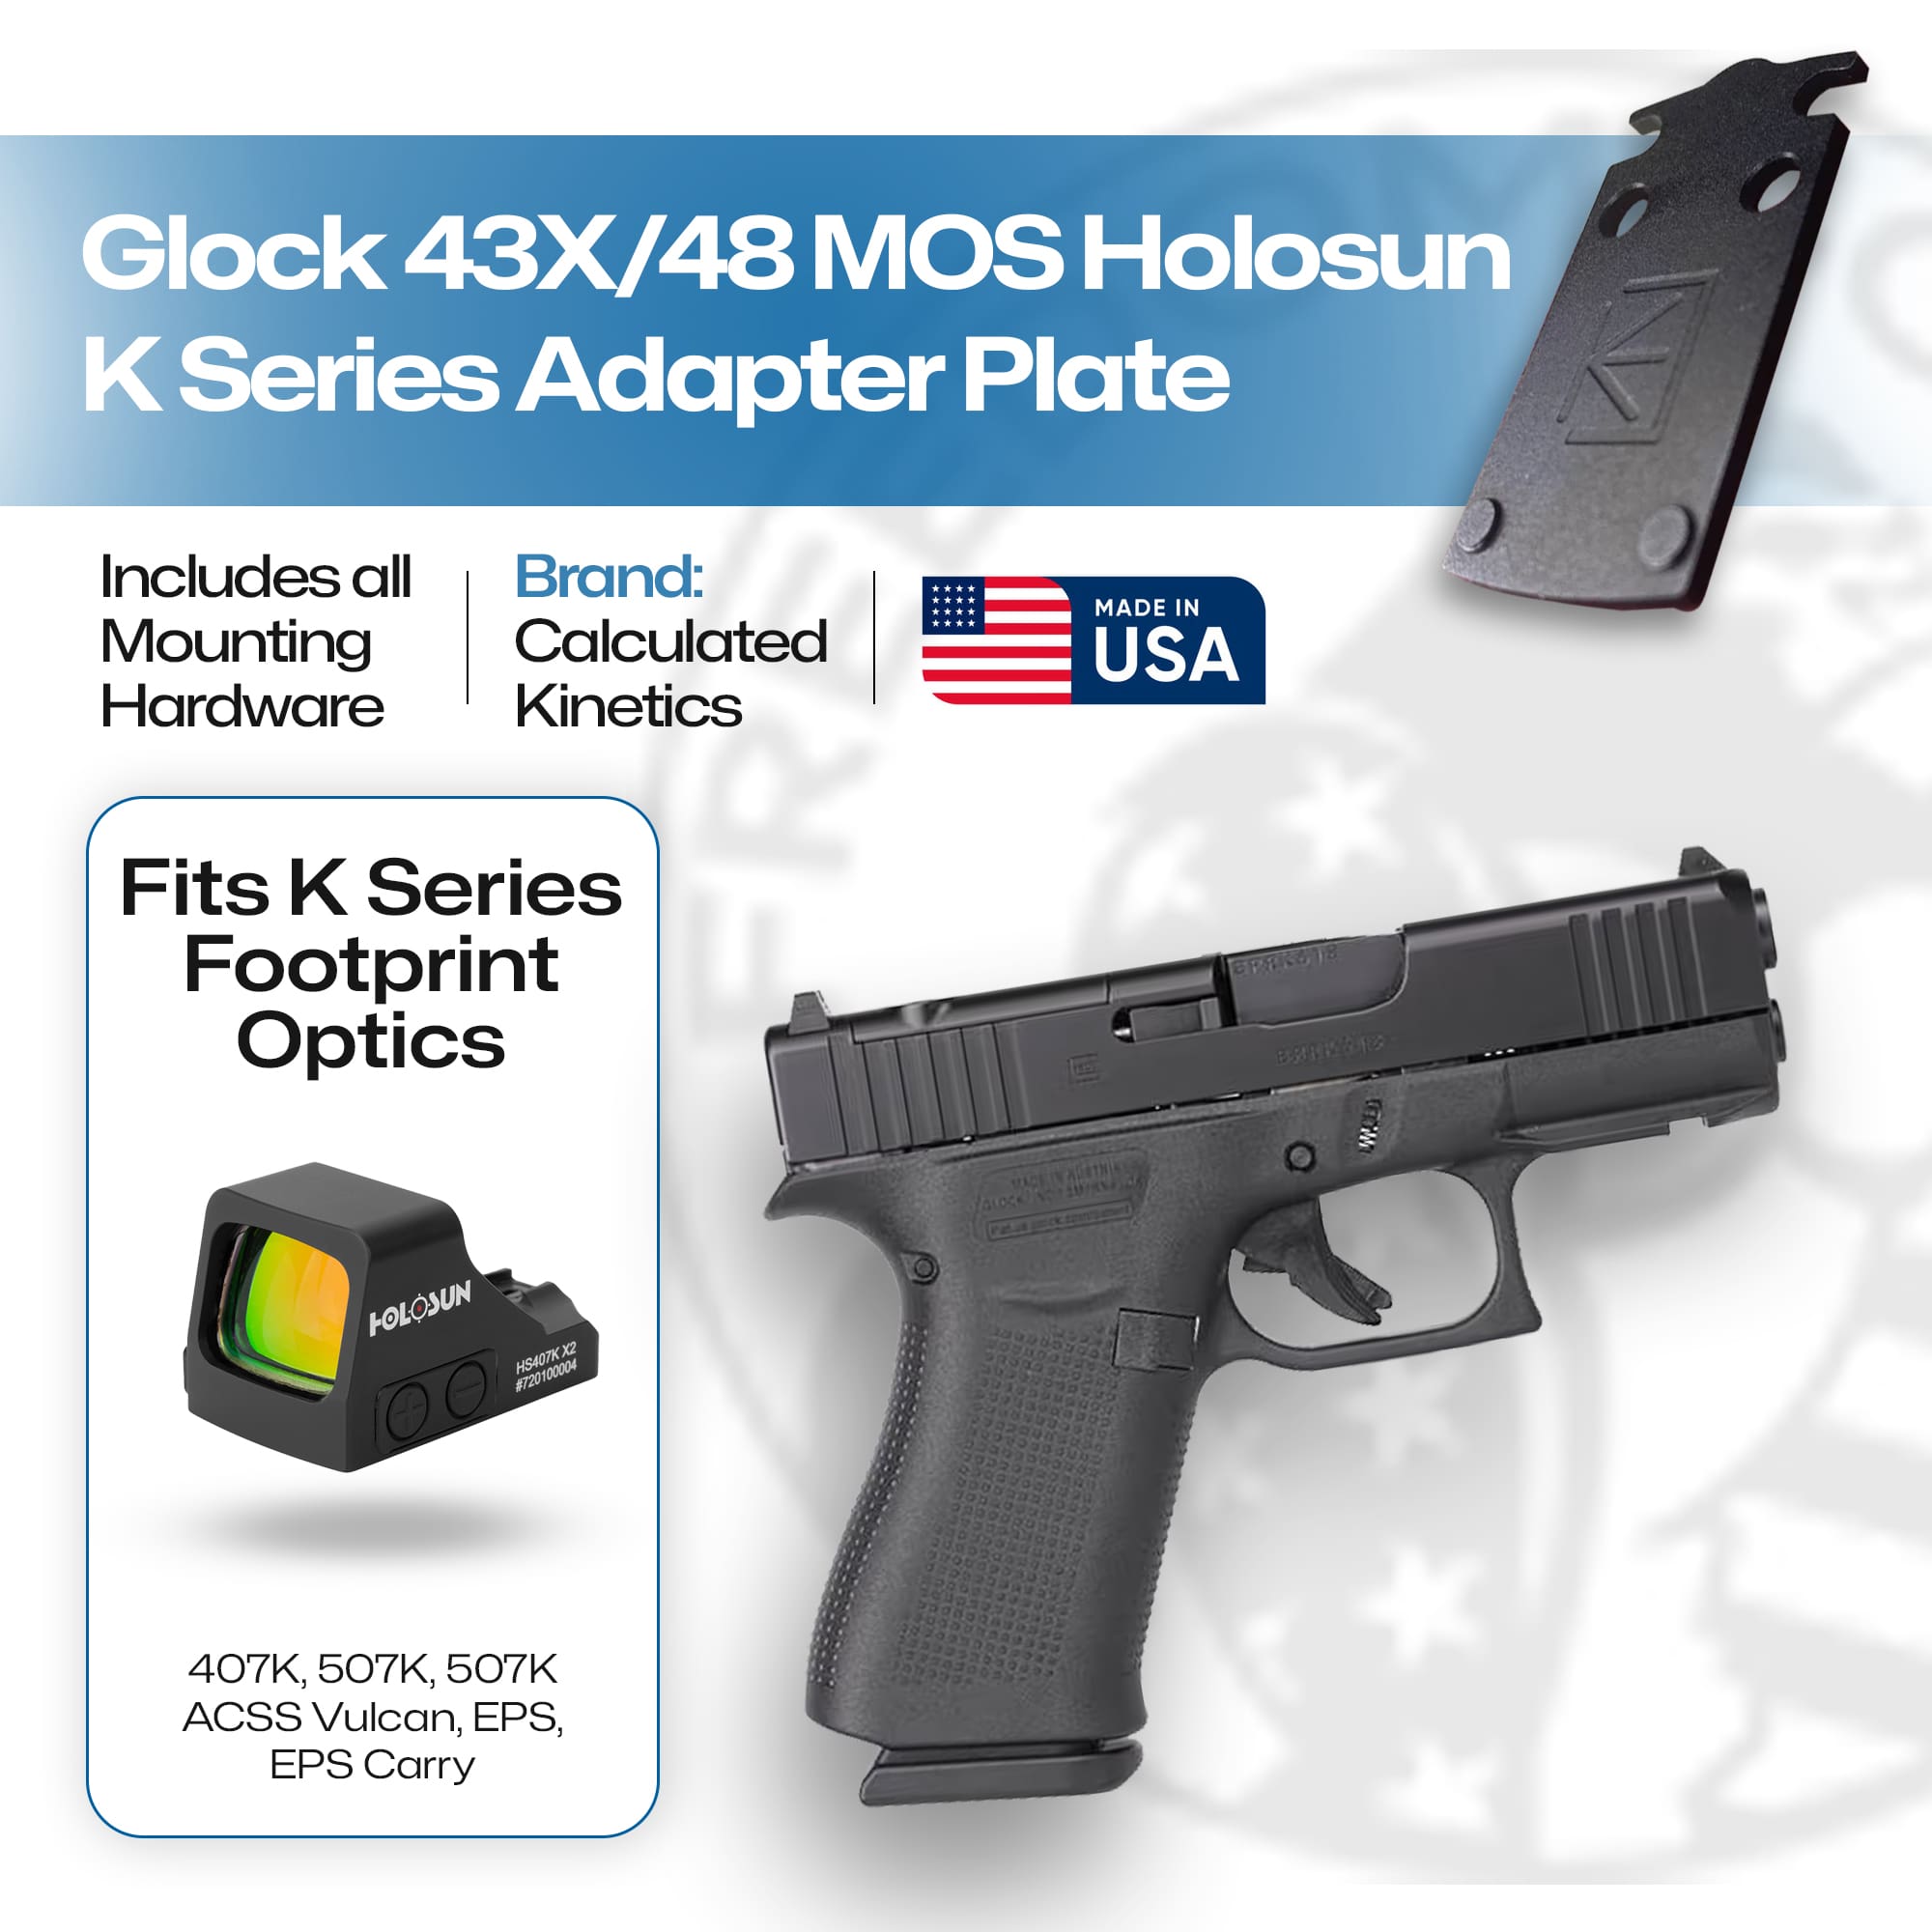 Glock 43X/48 MOS Holosun 407K/507K/EPS Carry Adapter Plate - Aluminum - Calculated Kinetics at